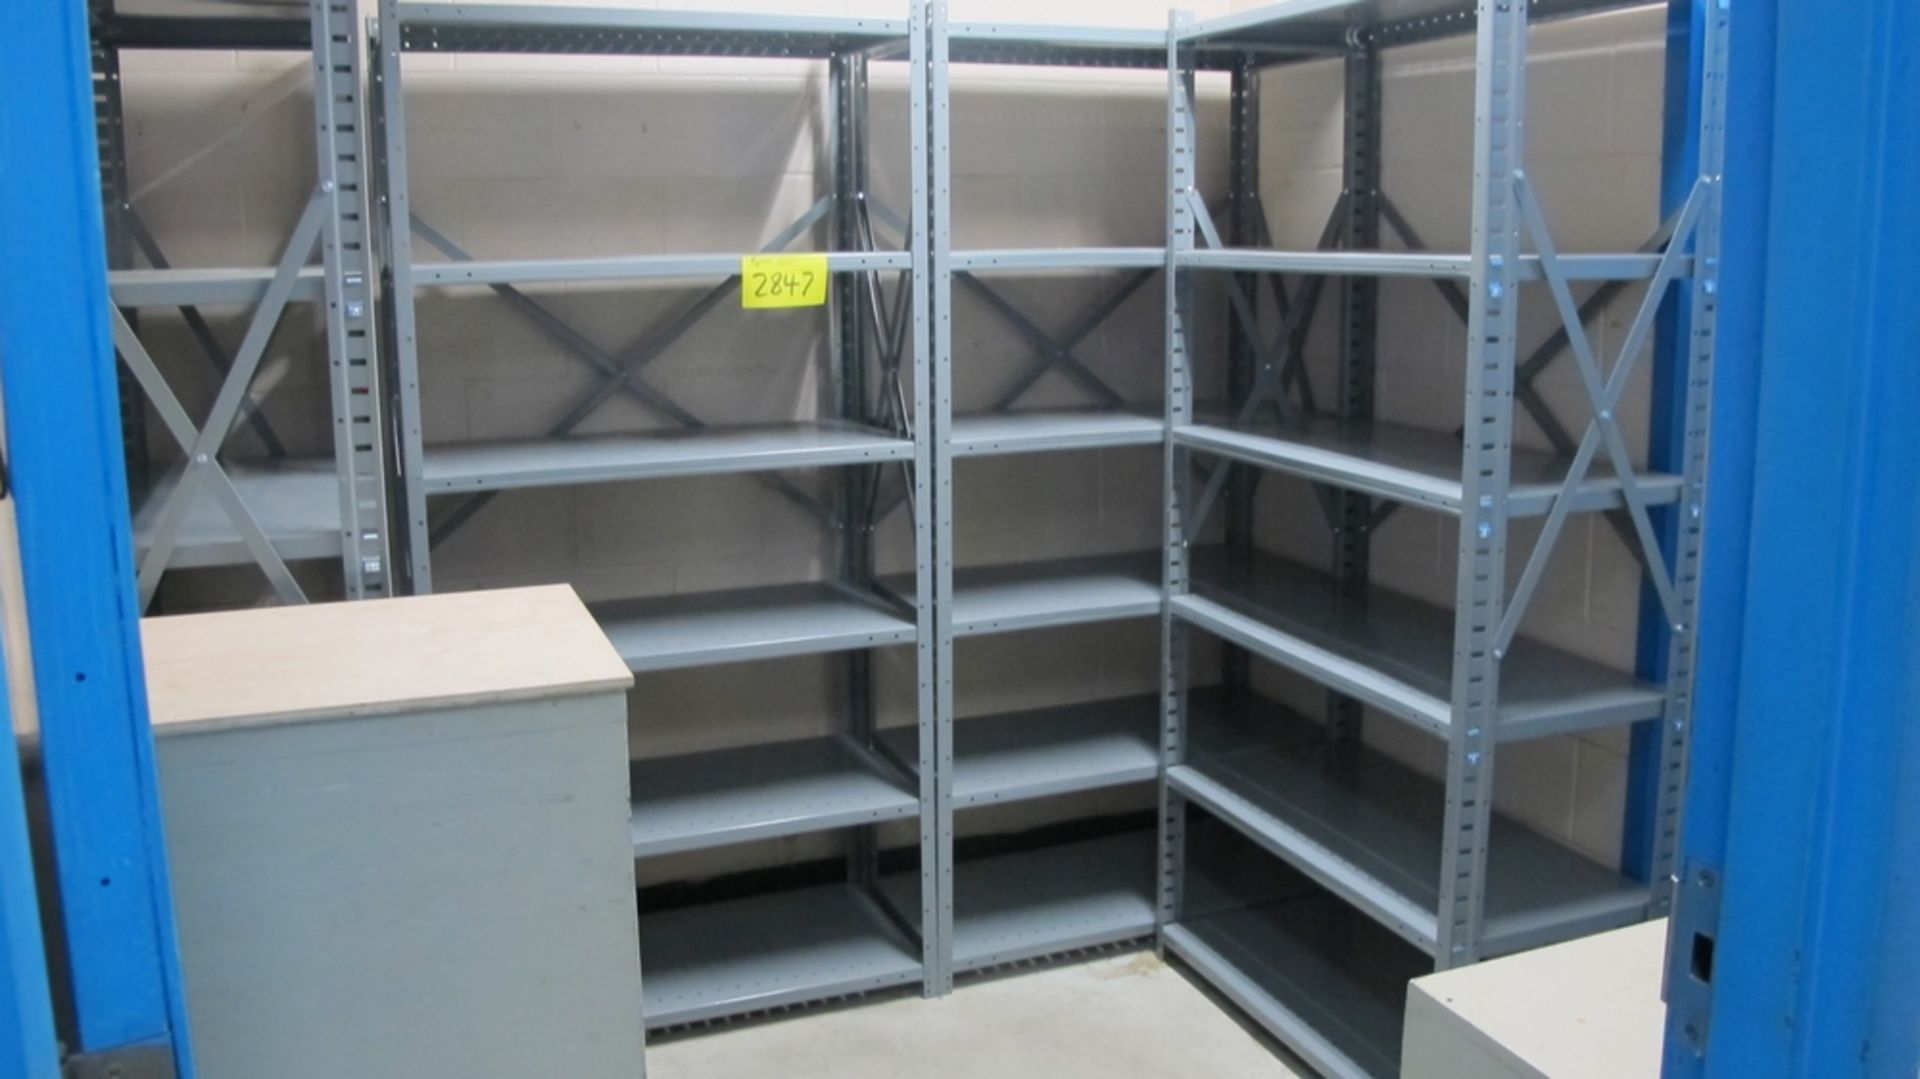 LOT OF CONTENTS OF SHELVING/STORAGE ROOM (100 SHIRLEY AVE KITCHENER)